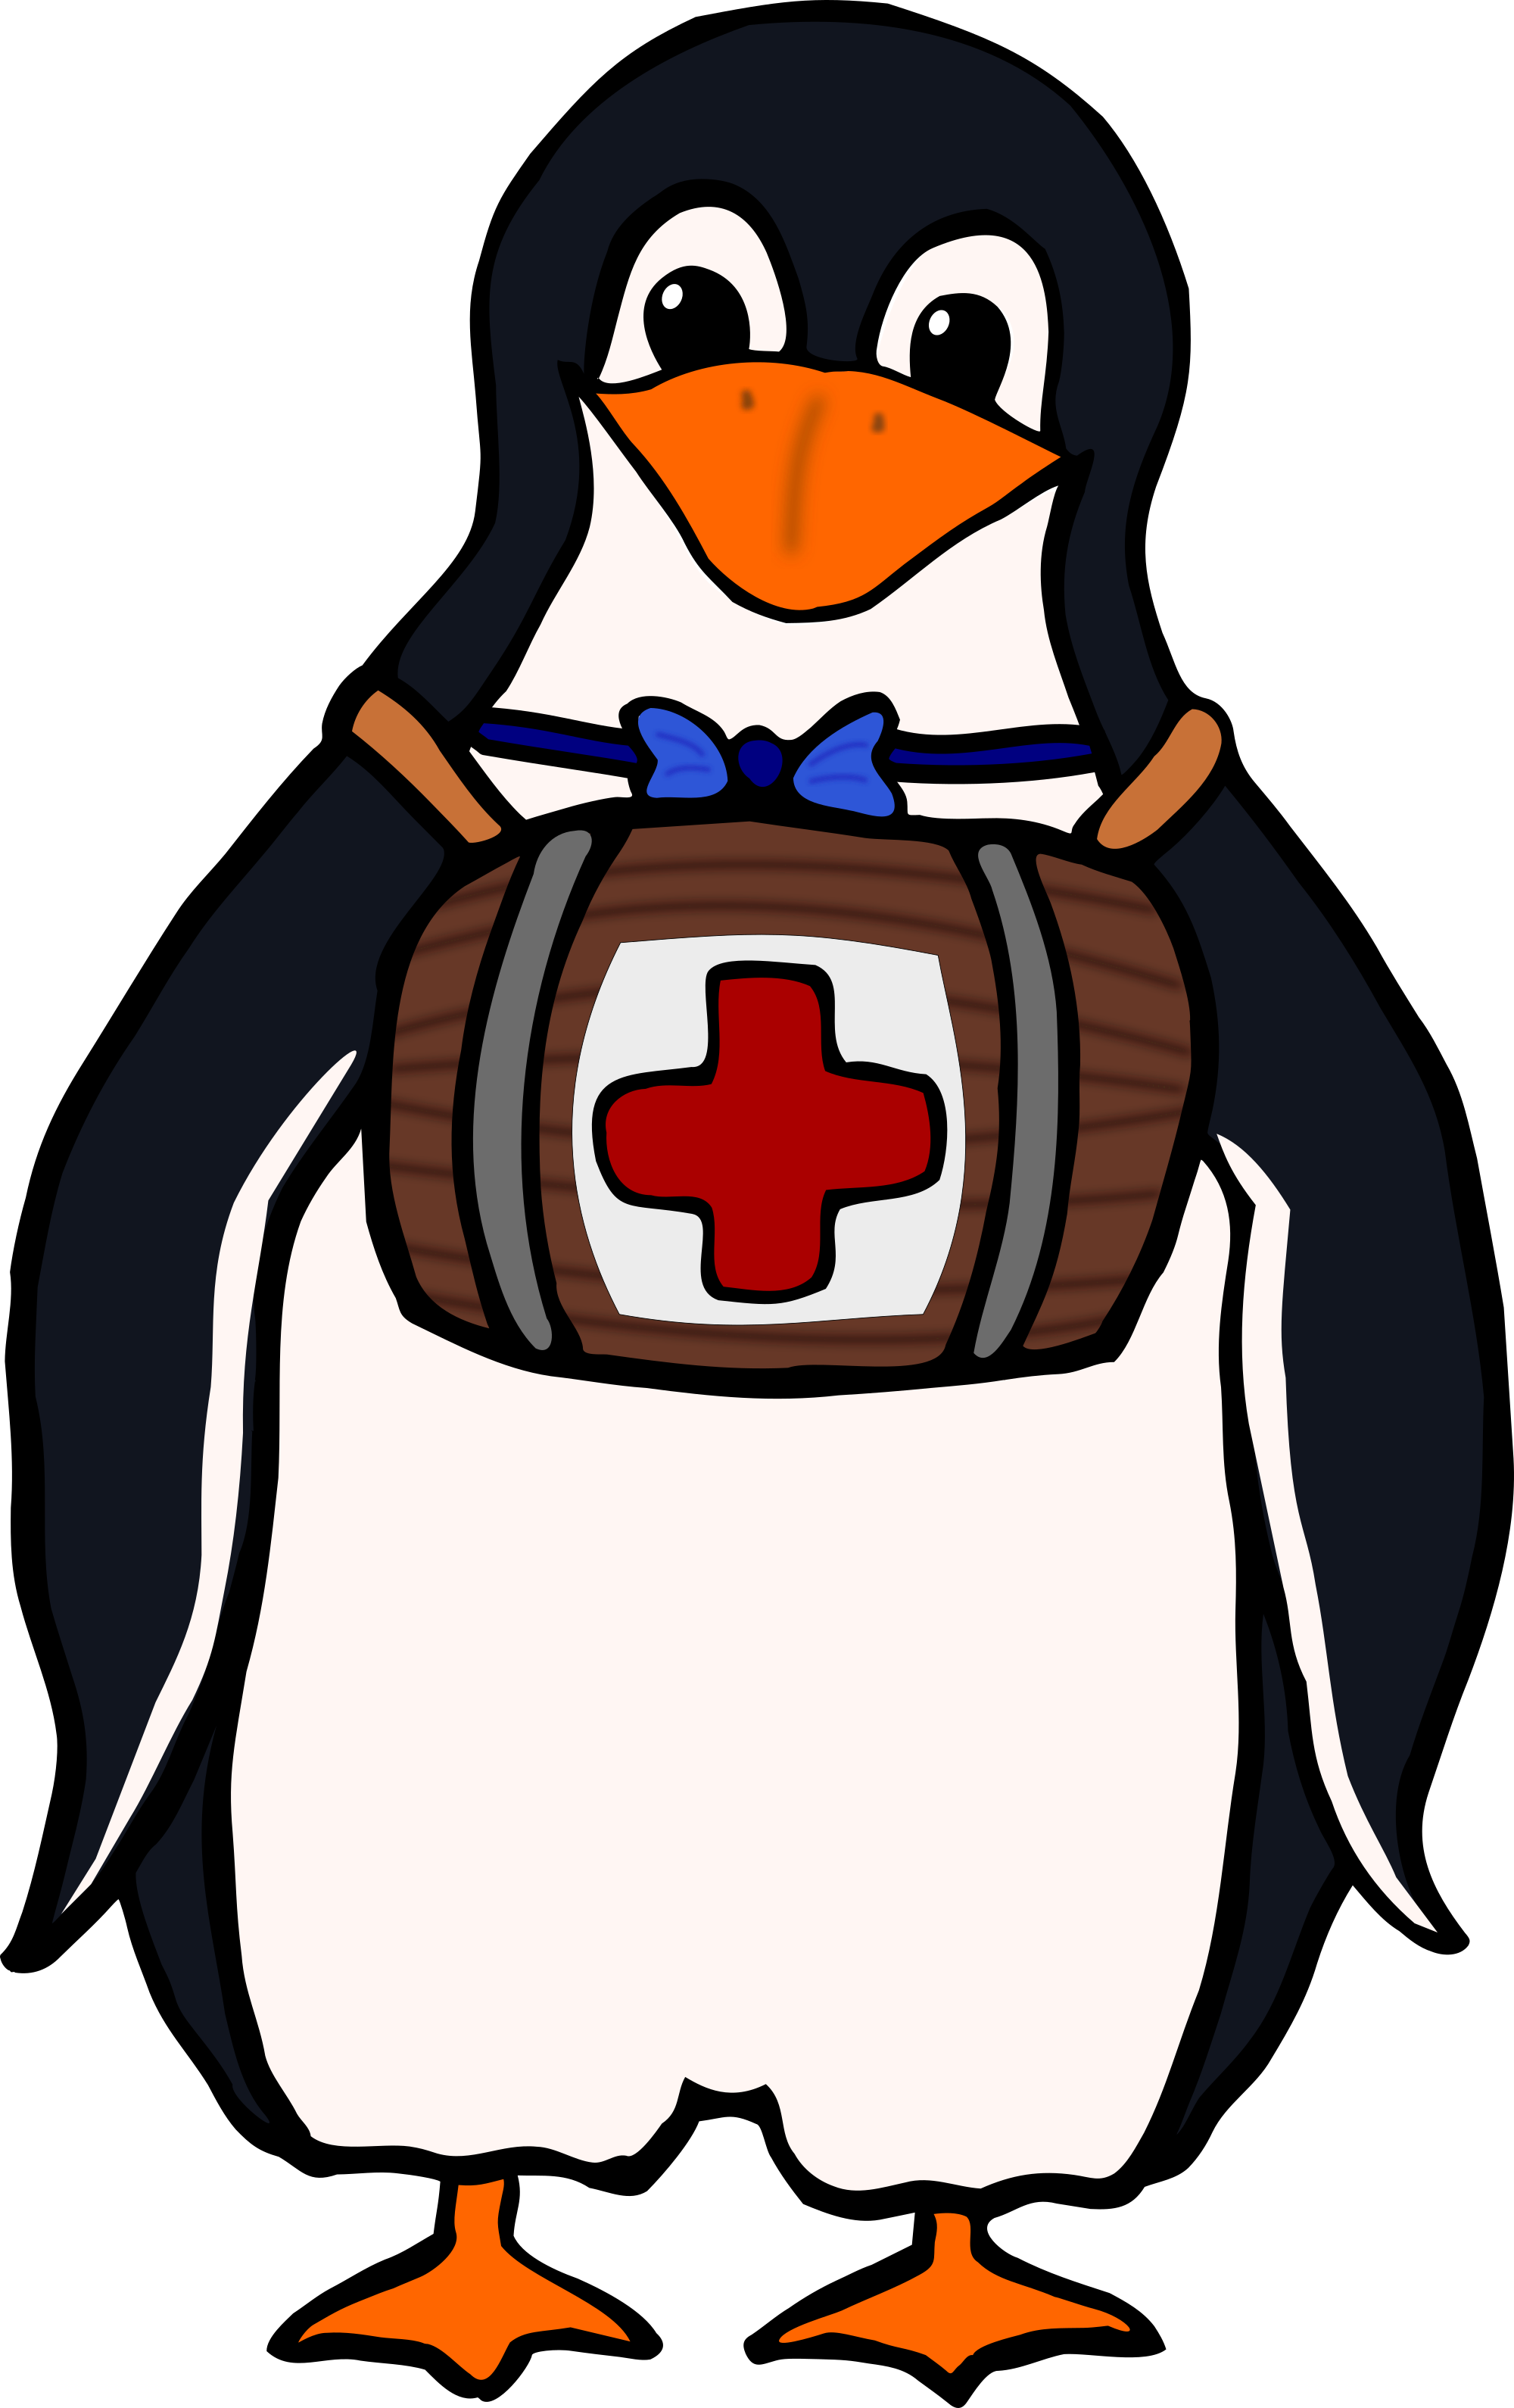 Free penguin red cross clipart clipart and vector image